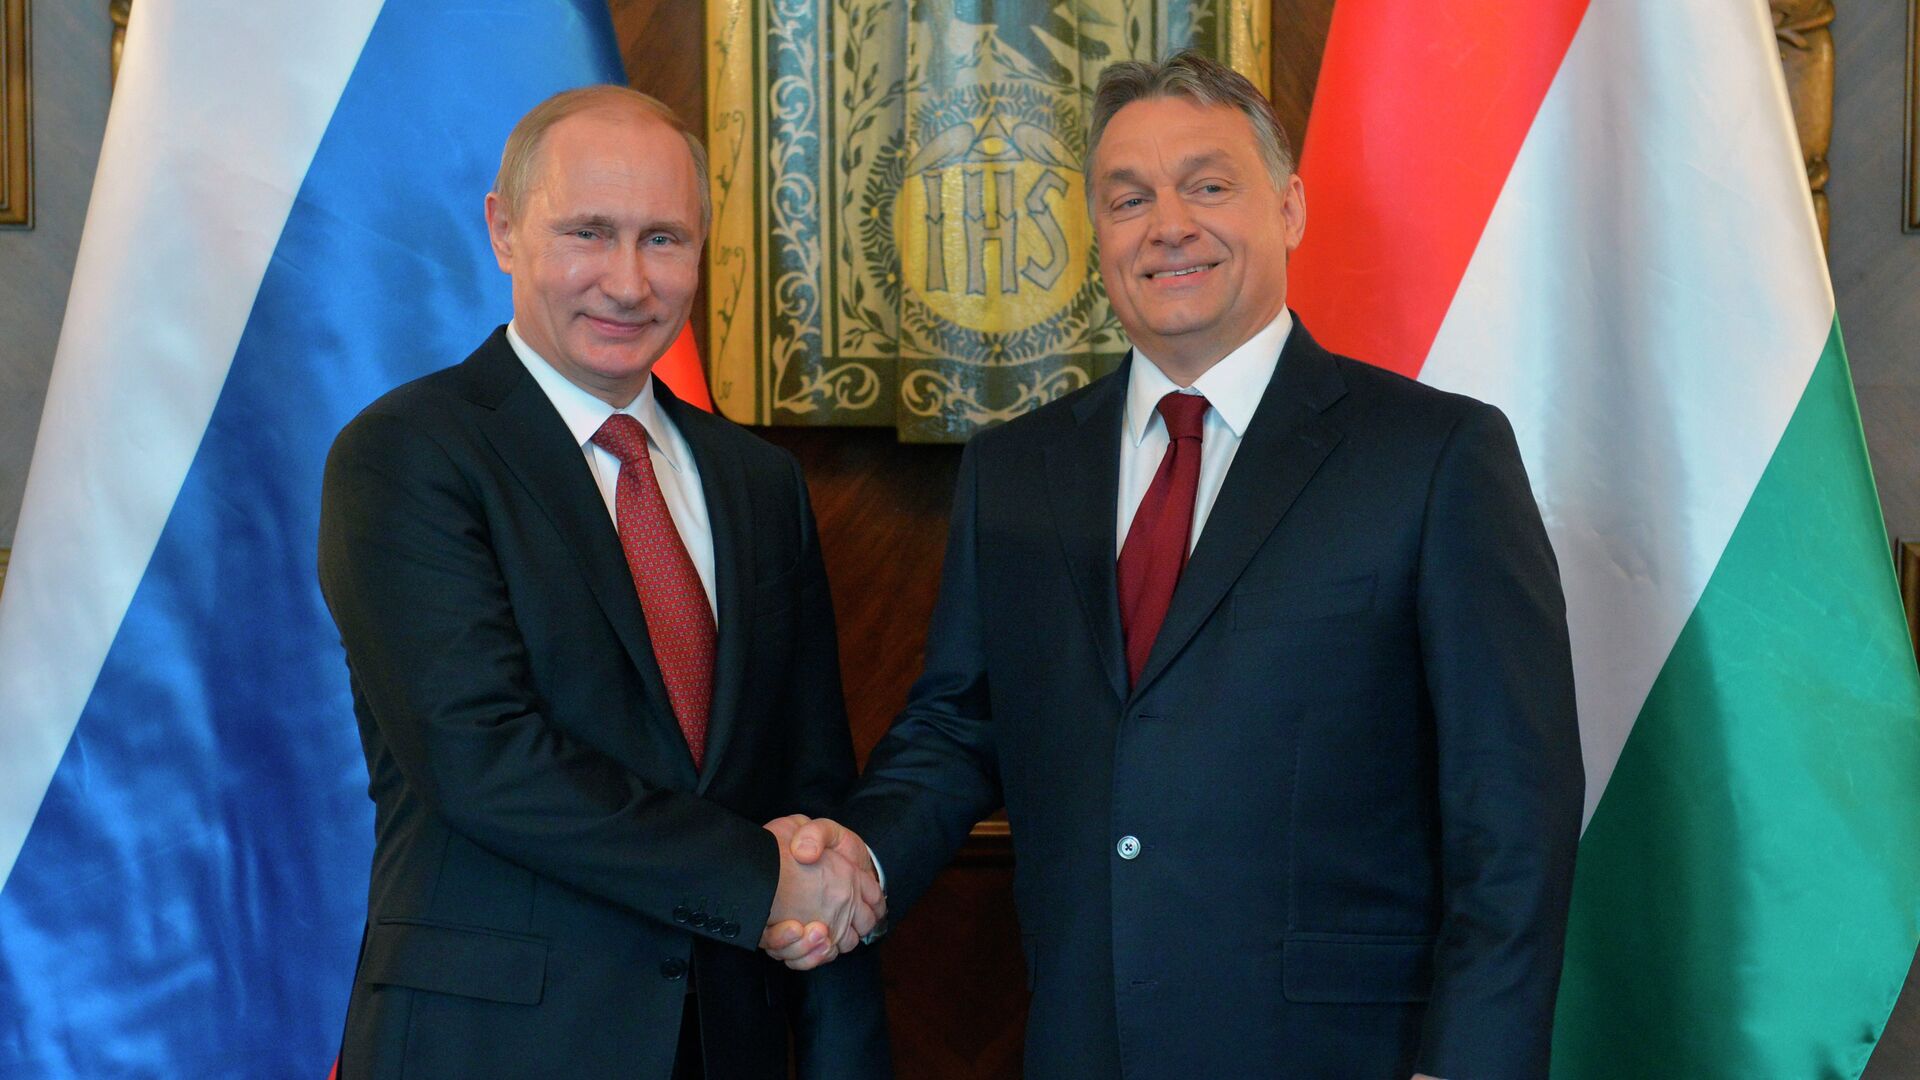 Russian President Vladimir Putin, left, and Hungarian Prime Minister Viktor Orban shake hands during their meeting at the parliament building in Budapest - Sputnik International, 1920, 01.02.2022